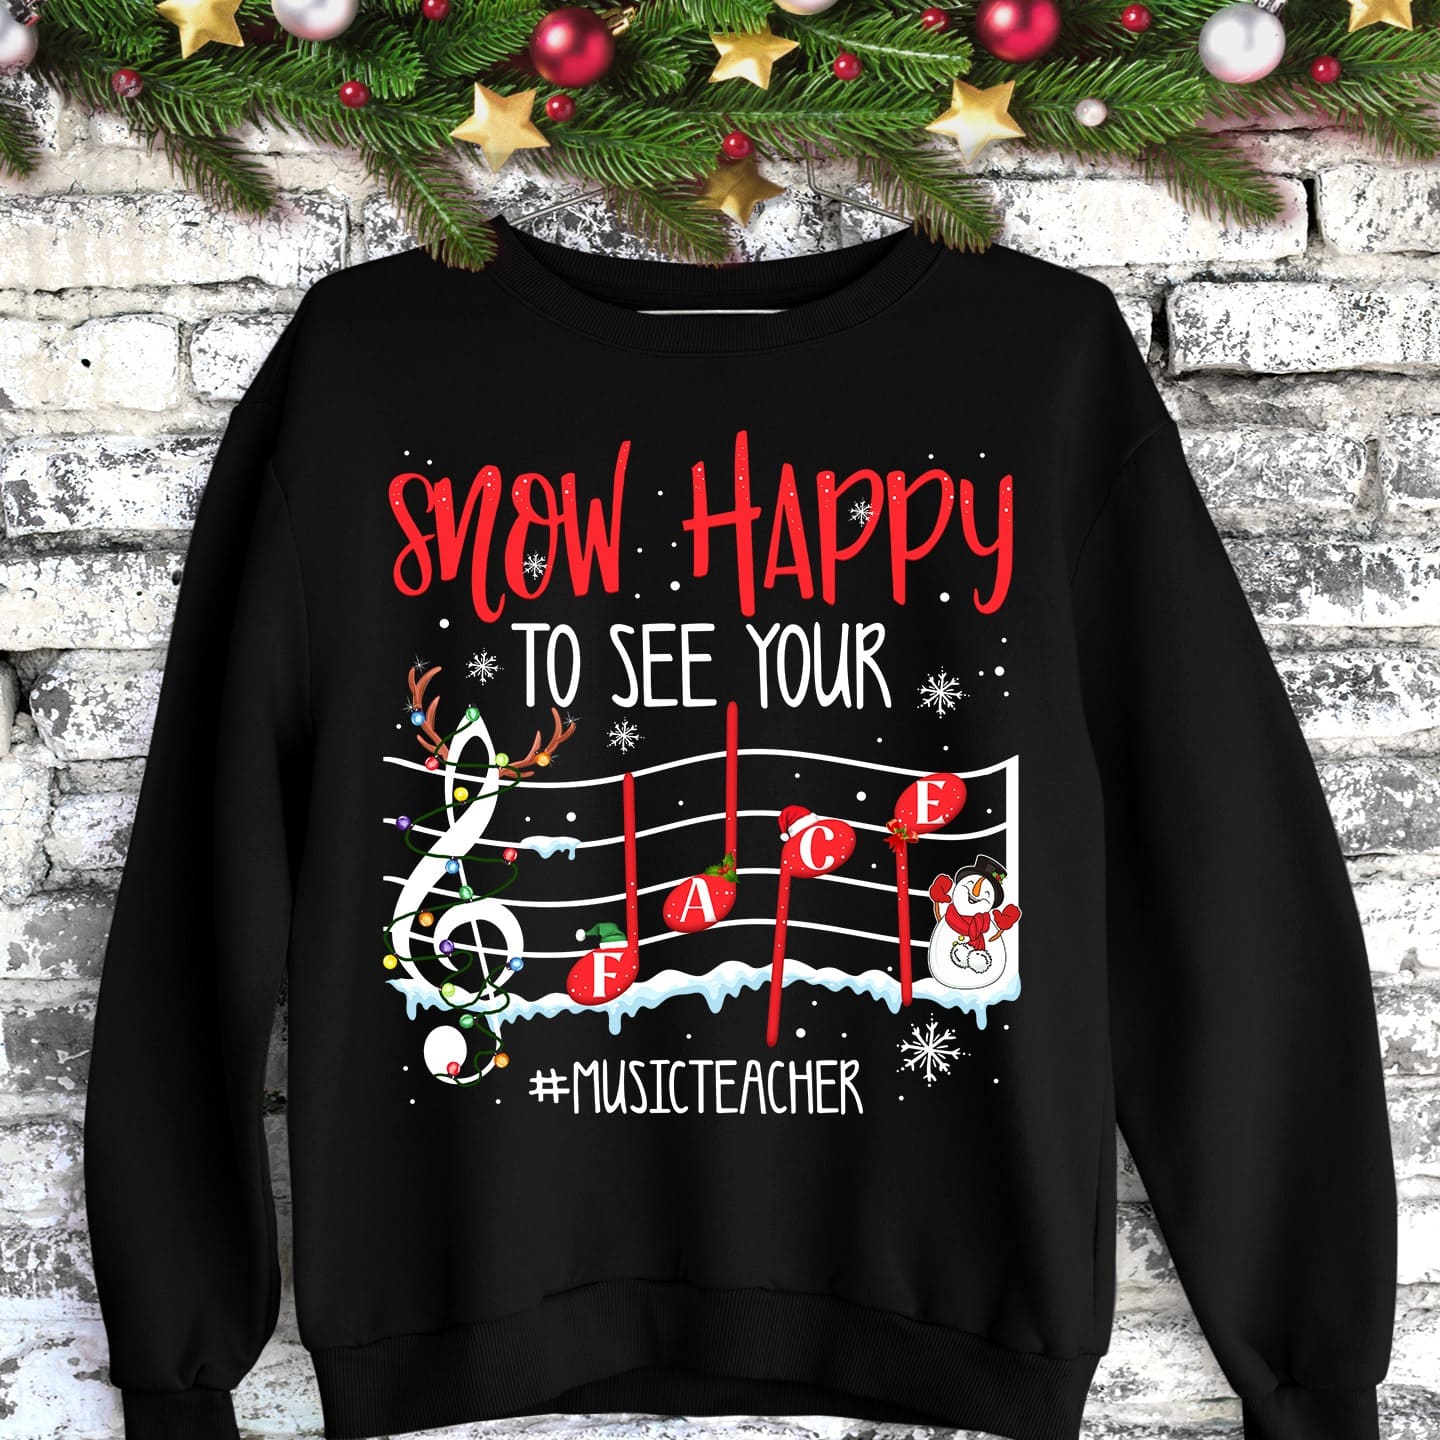 Music Note Christmas Music Teacher - Snow happy to see your face